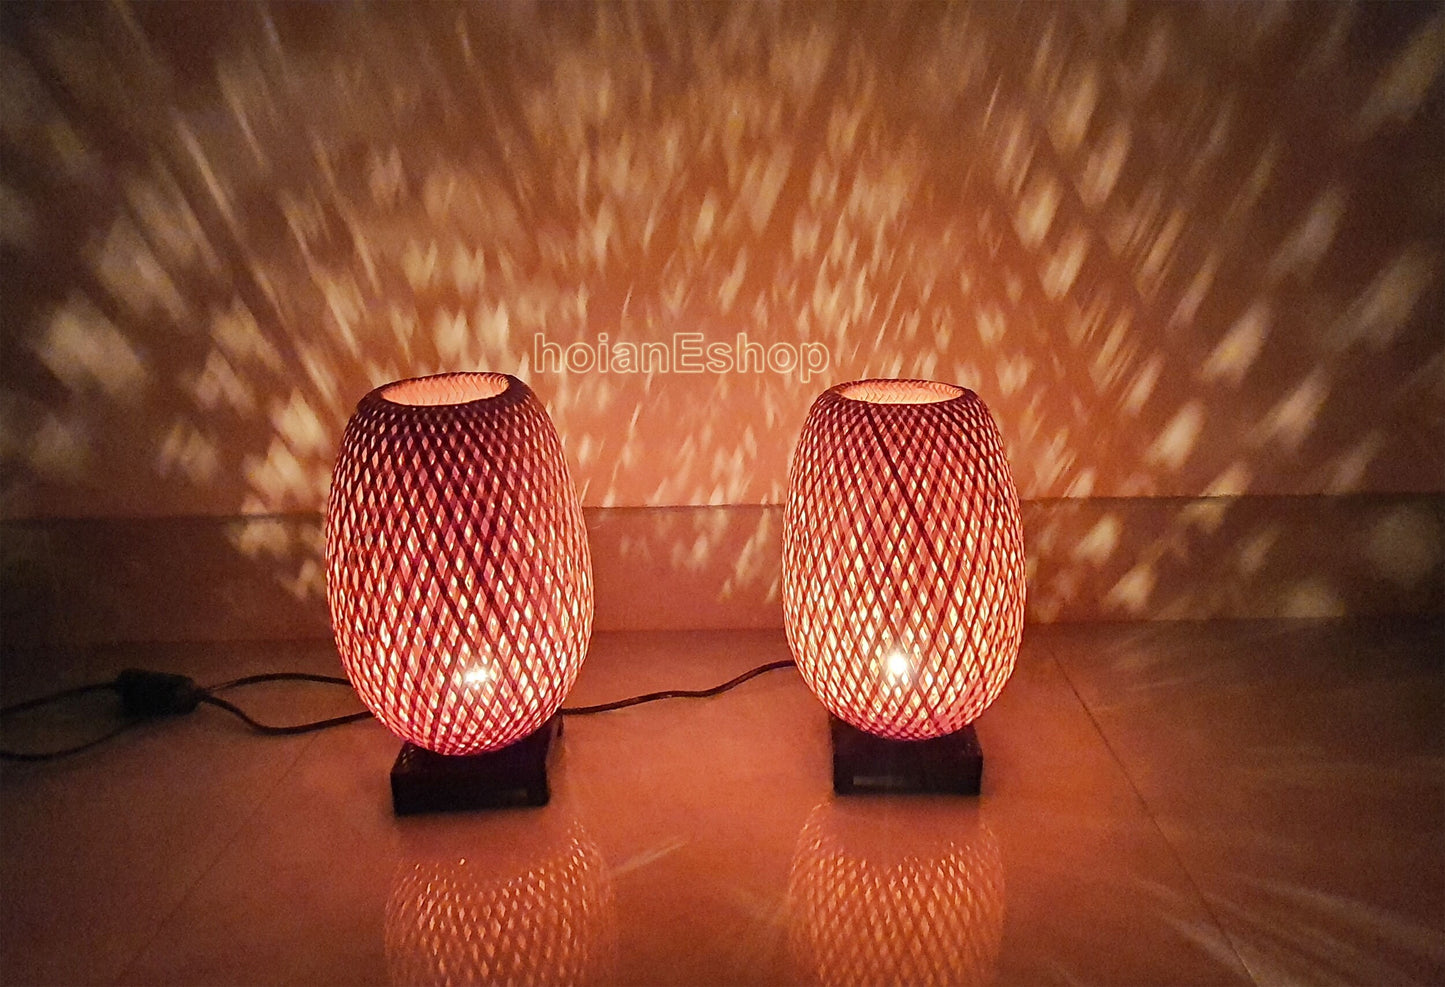 Set 2 pcs of 28cm bamboo bedside lamps with dimmer for bedroom, table lamps, floor lamps for living room, bamboo lampshade for home decor